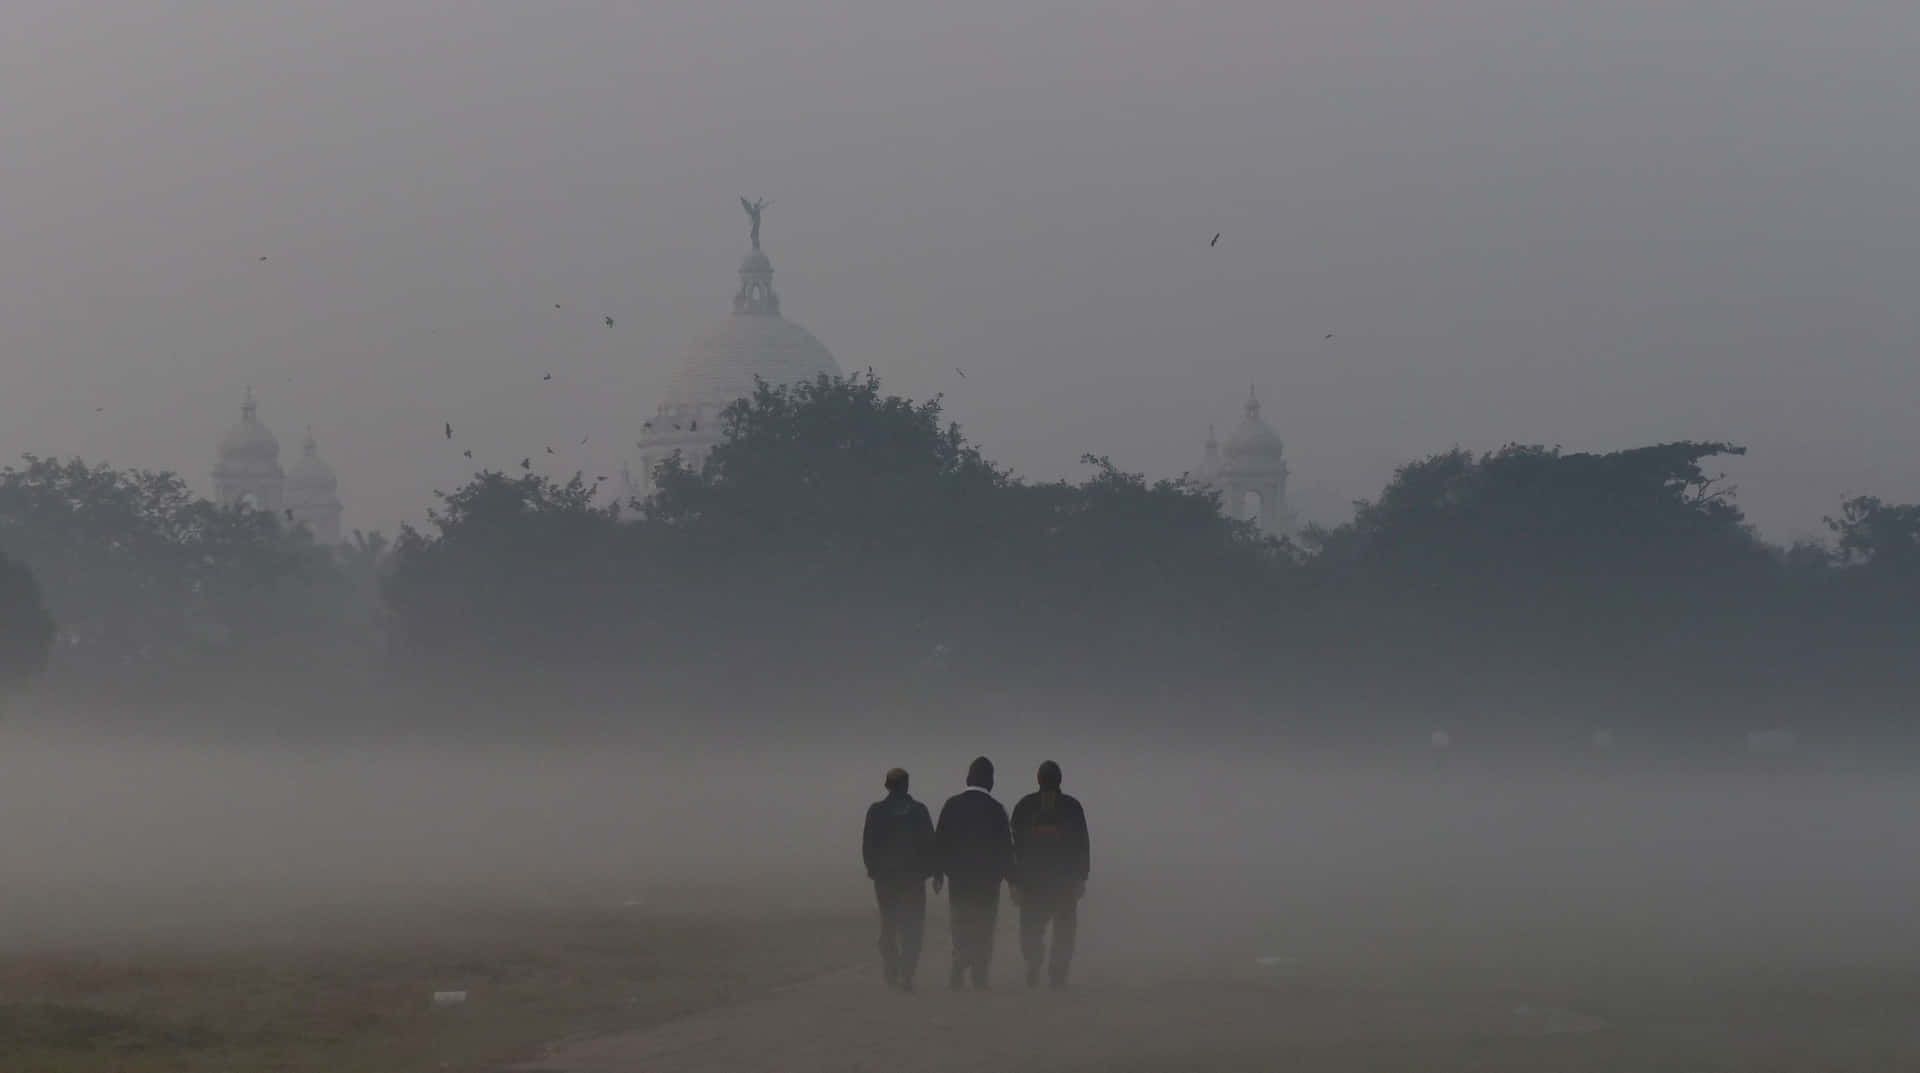 Three Men Walking In The Fog With A Church In The Background